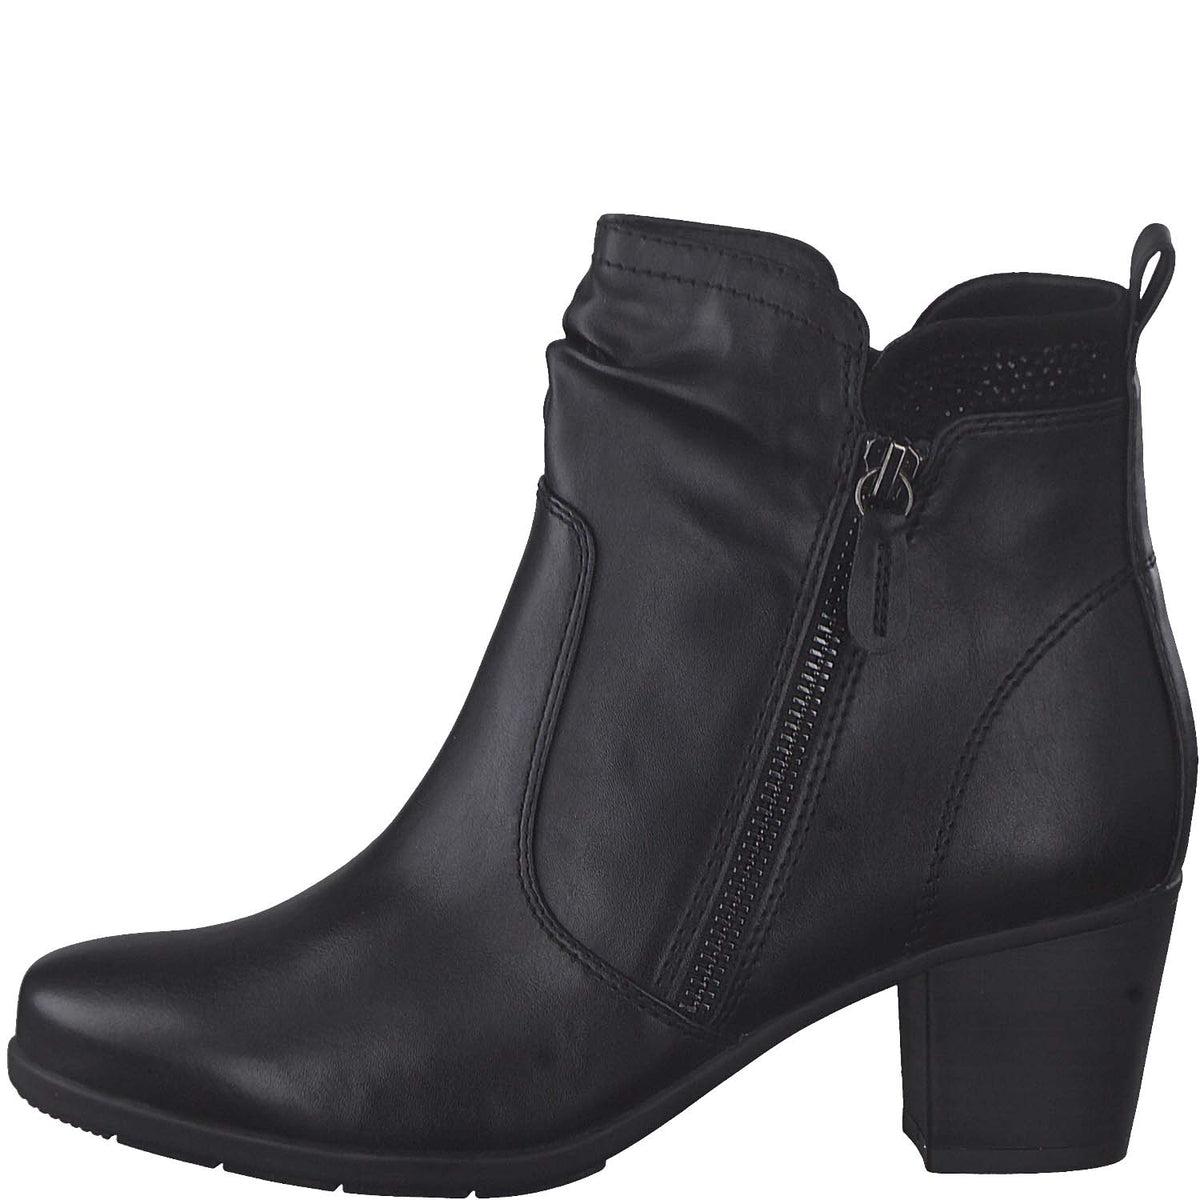 Front view of Jana Black Ankle Block Heel Boot.